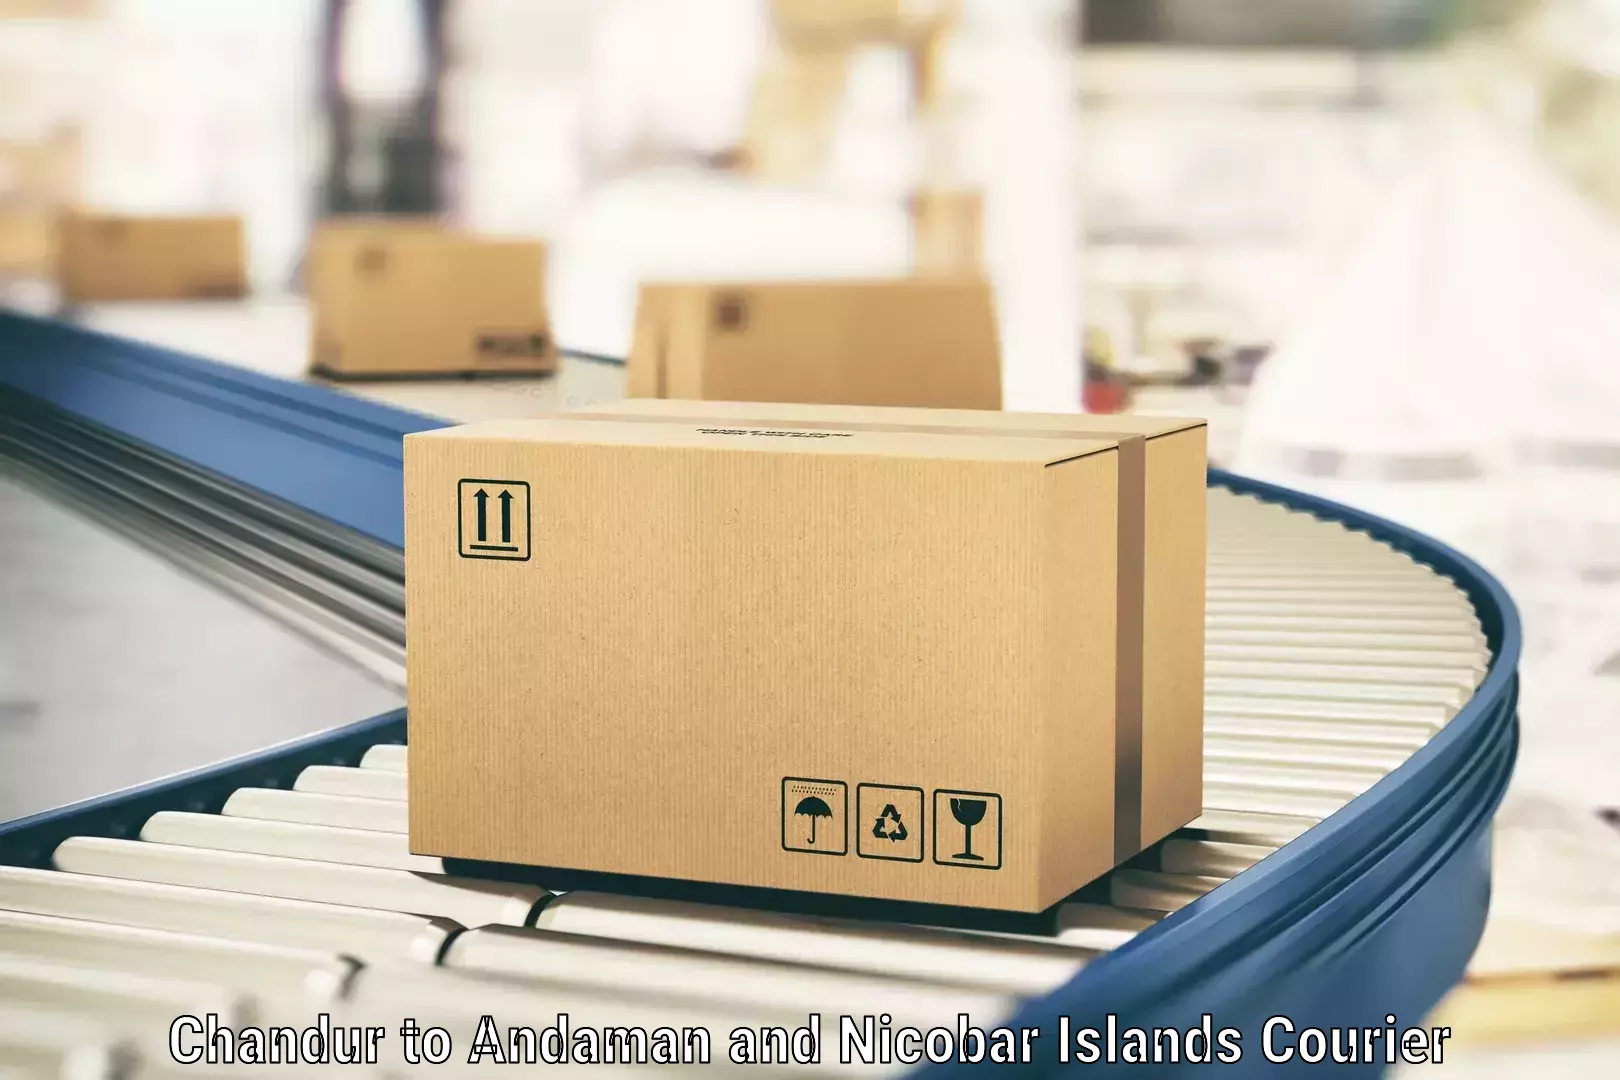 Affordable parcel service Chandur to Andaman and Nicobar Islands